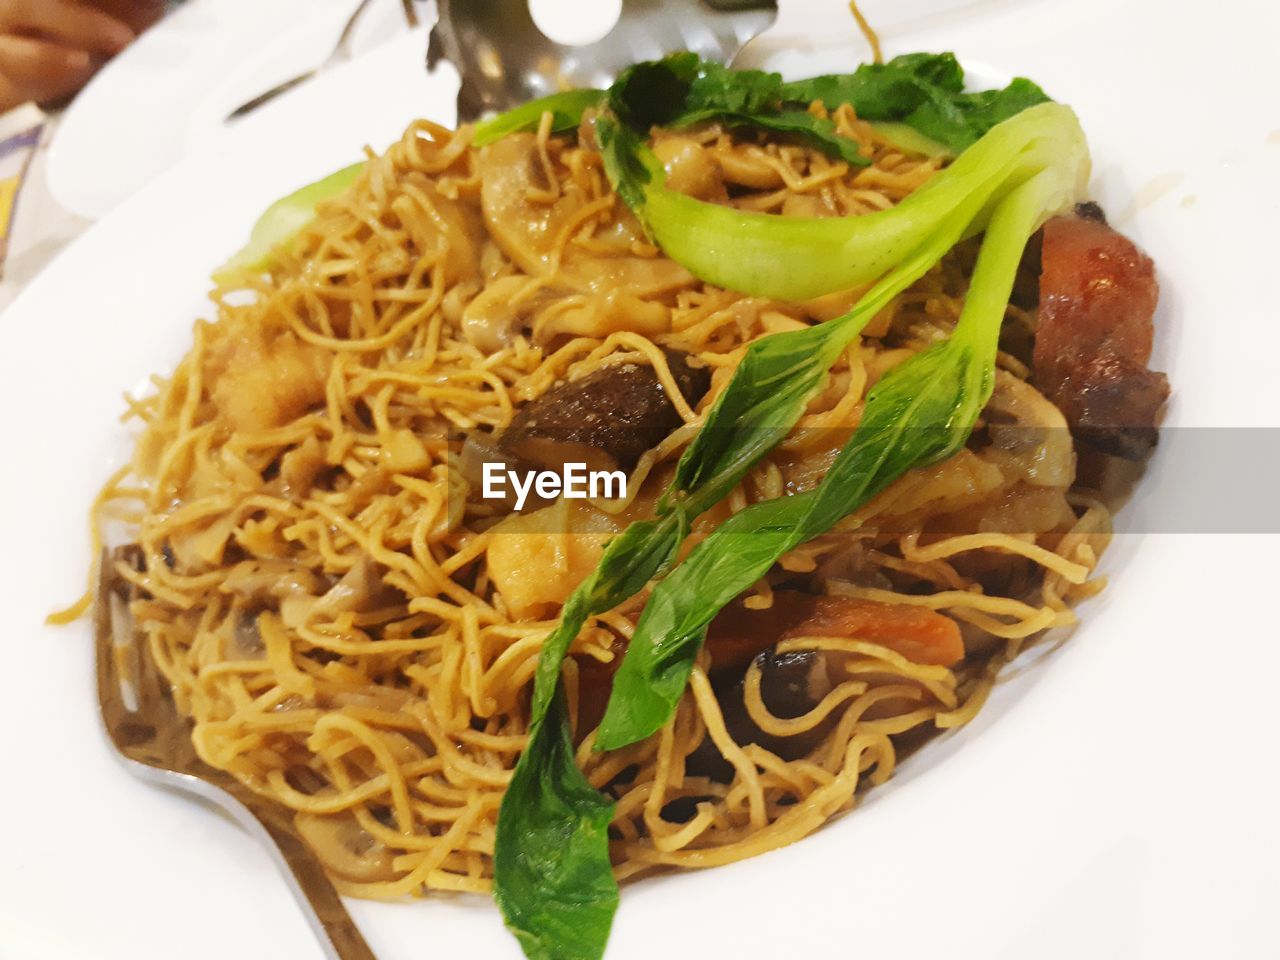 CLOSE-UP OF NOODLES IN PLATE